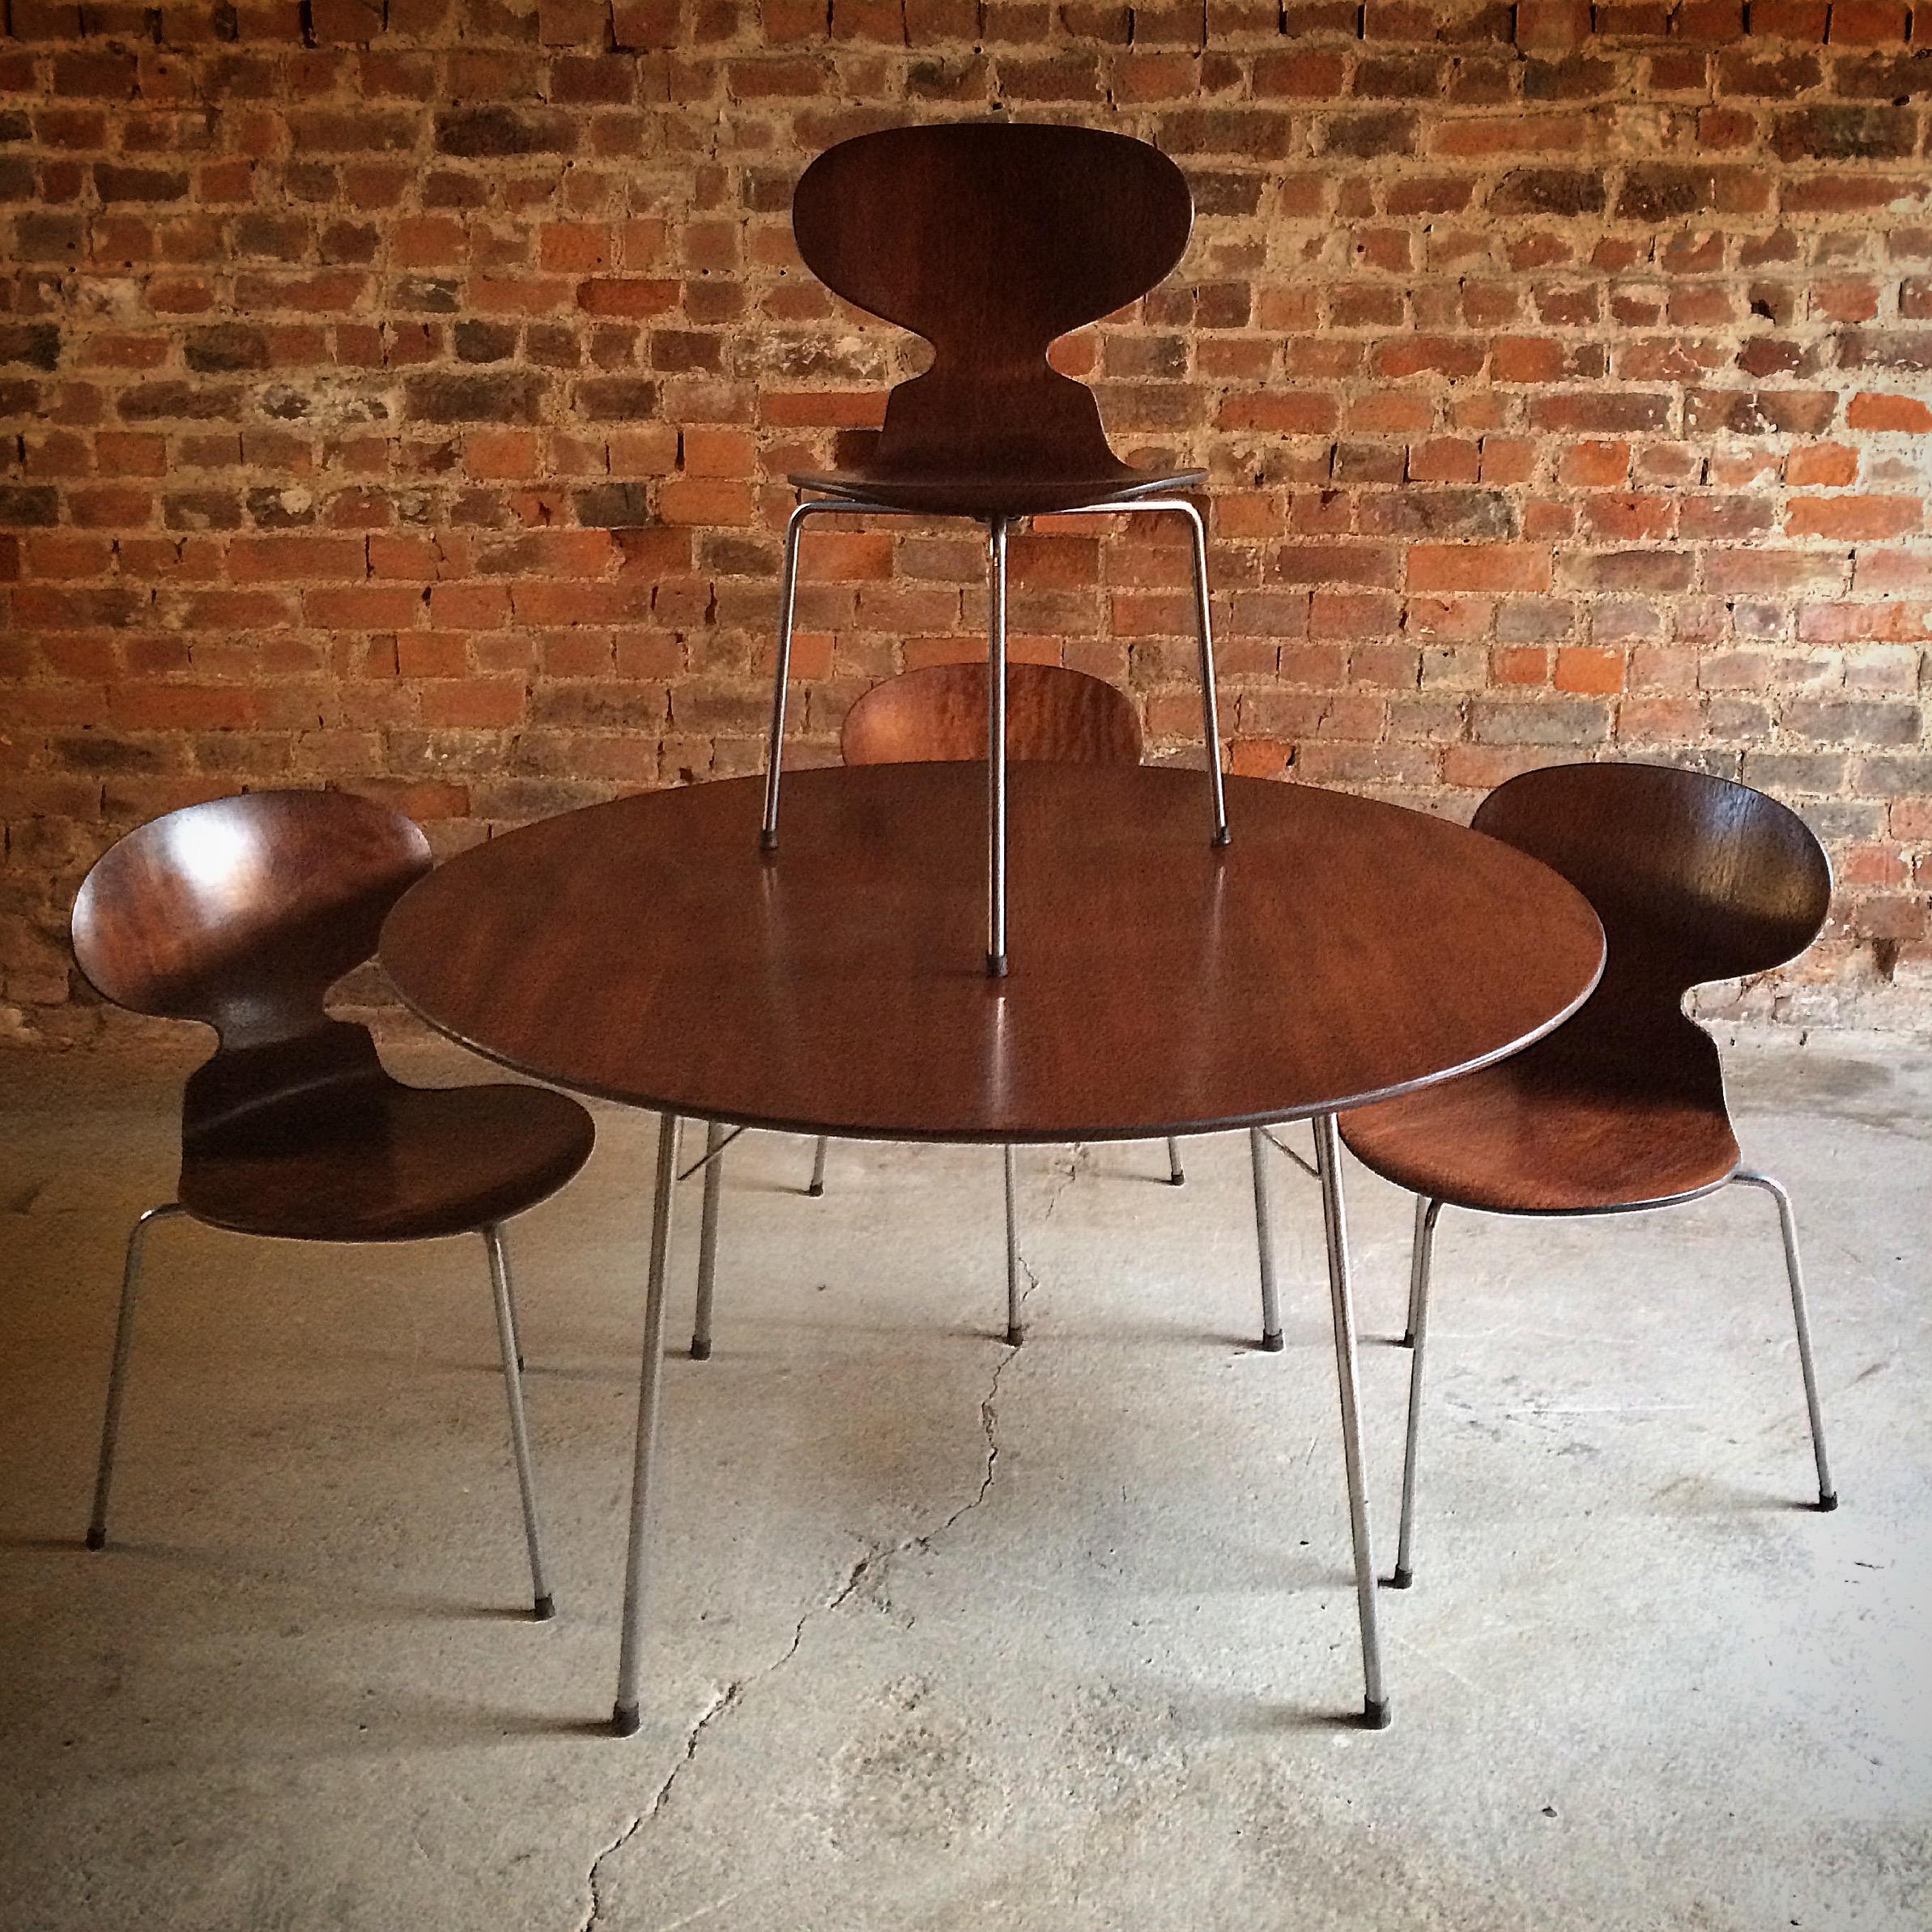 Arne Jacobsen Table and Four Ant Chairs Danish 1950s Midcentury Fritz Hansen 7